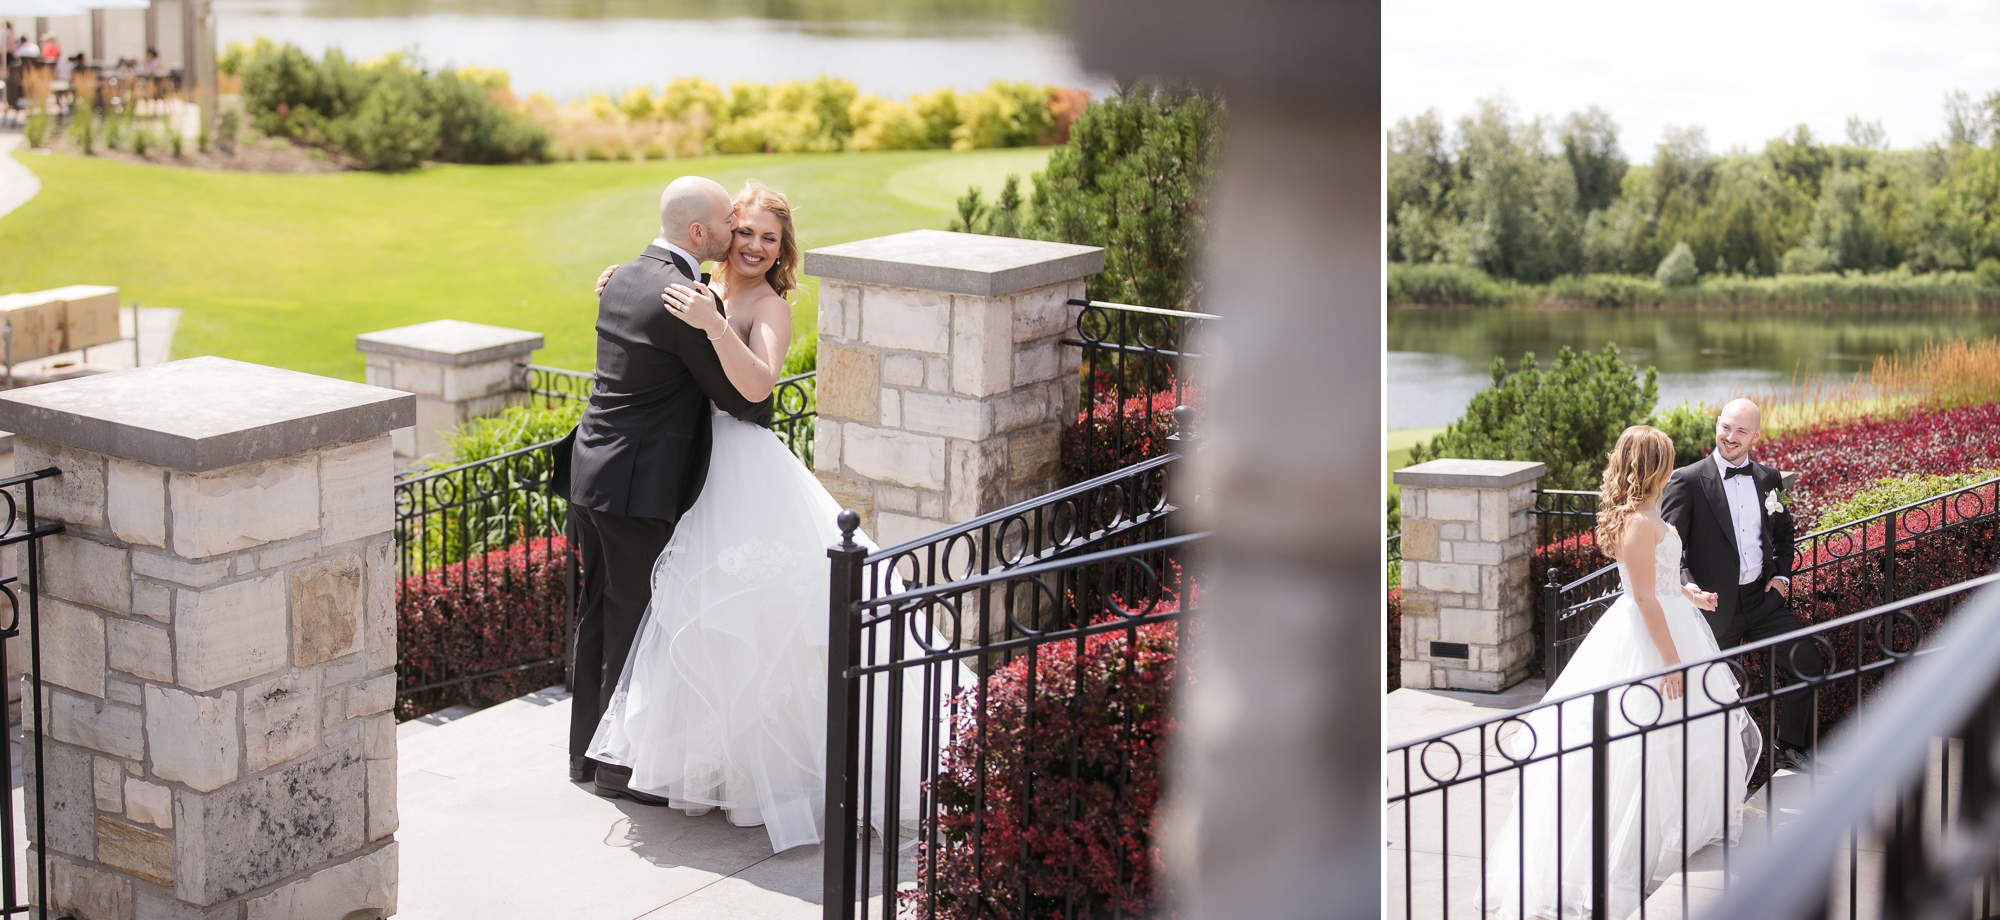 Toronto Wedding at Eagles Nest. The groom kisses the bride on the cheek on the outside patio.